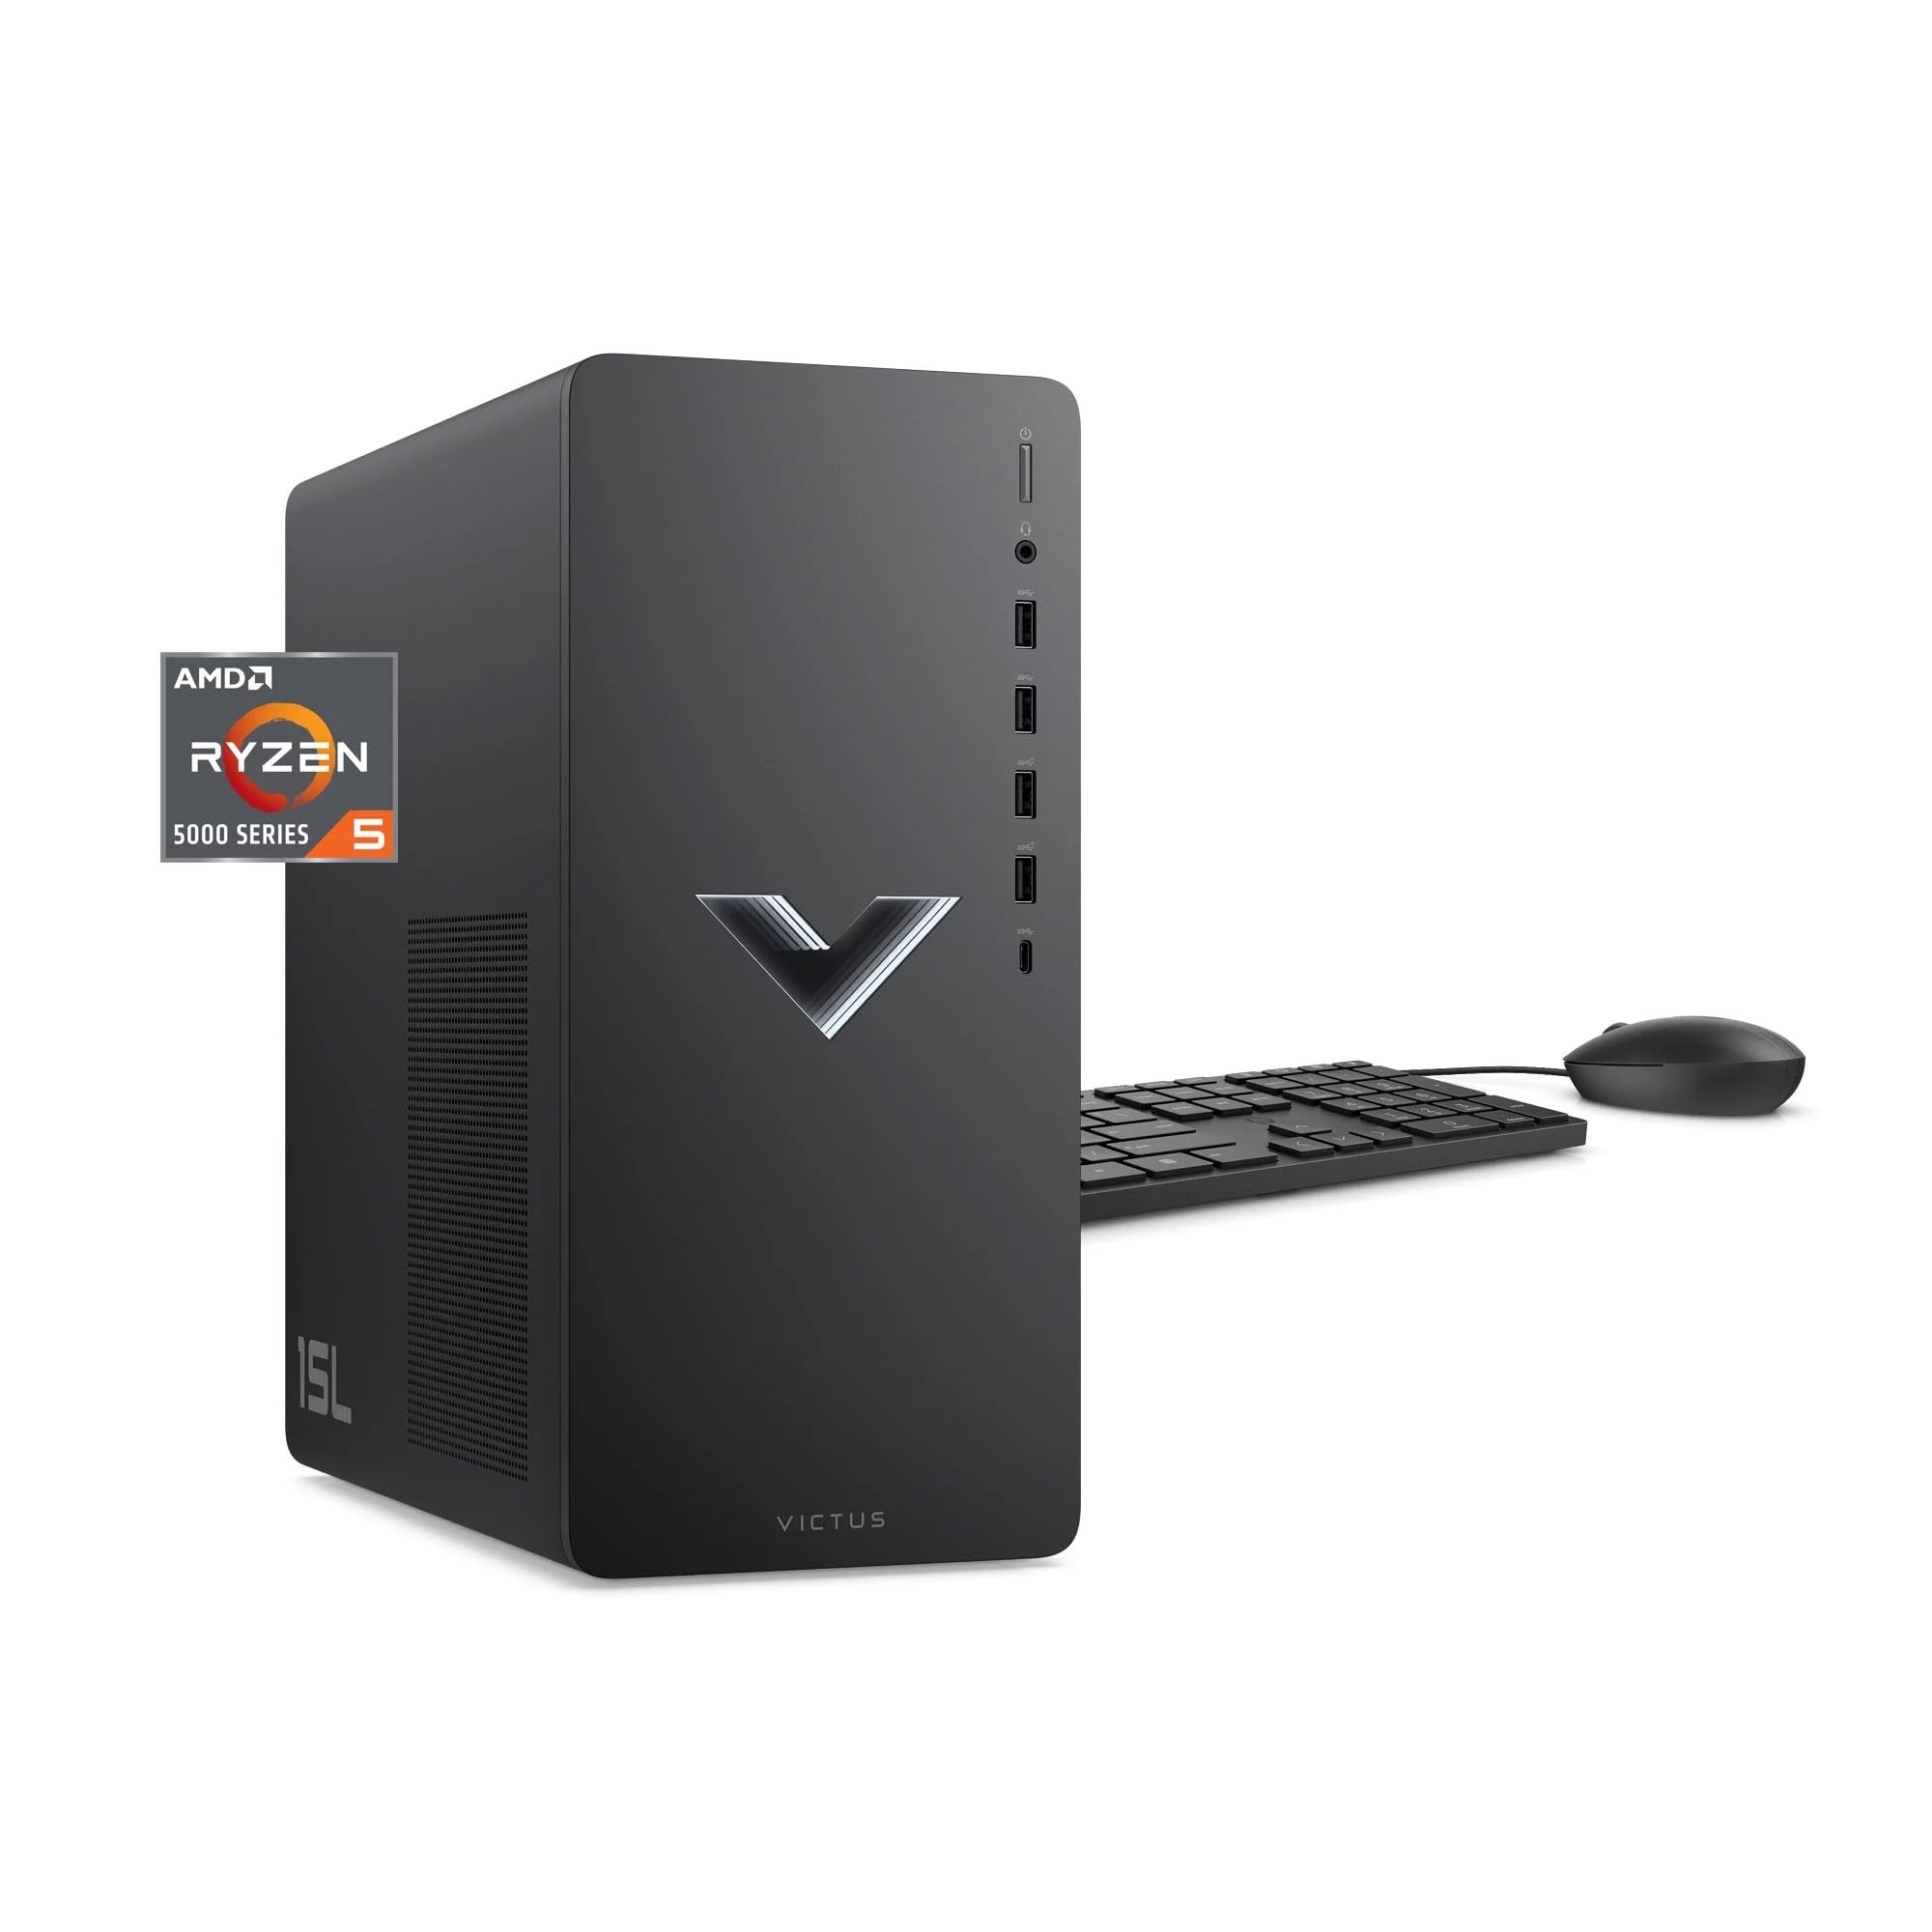 HP 2023 Victus 15L Gaming Desktop PC, AMD 6-Core Ryzen 5600G Processor (Up to 4.4 GHz), 16GB RAM, 512GB SSD, AMD Radeon RX6400, Mouse and Keyboard, Win 11 Home, Mica Silver, Z&O Accessory